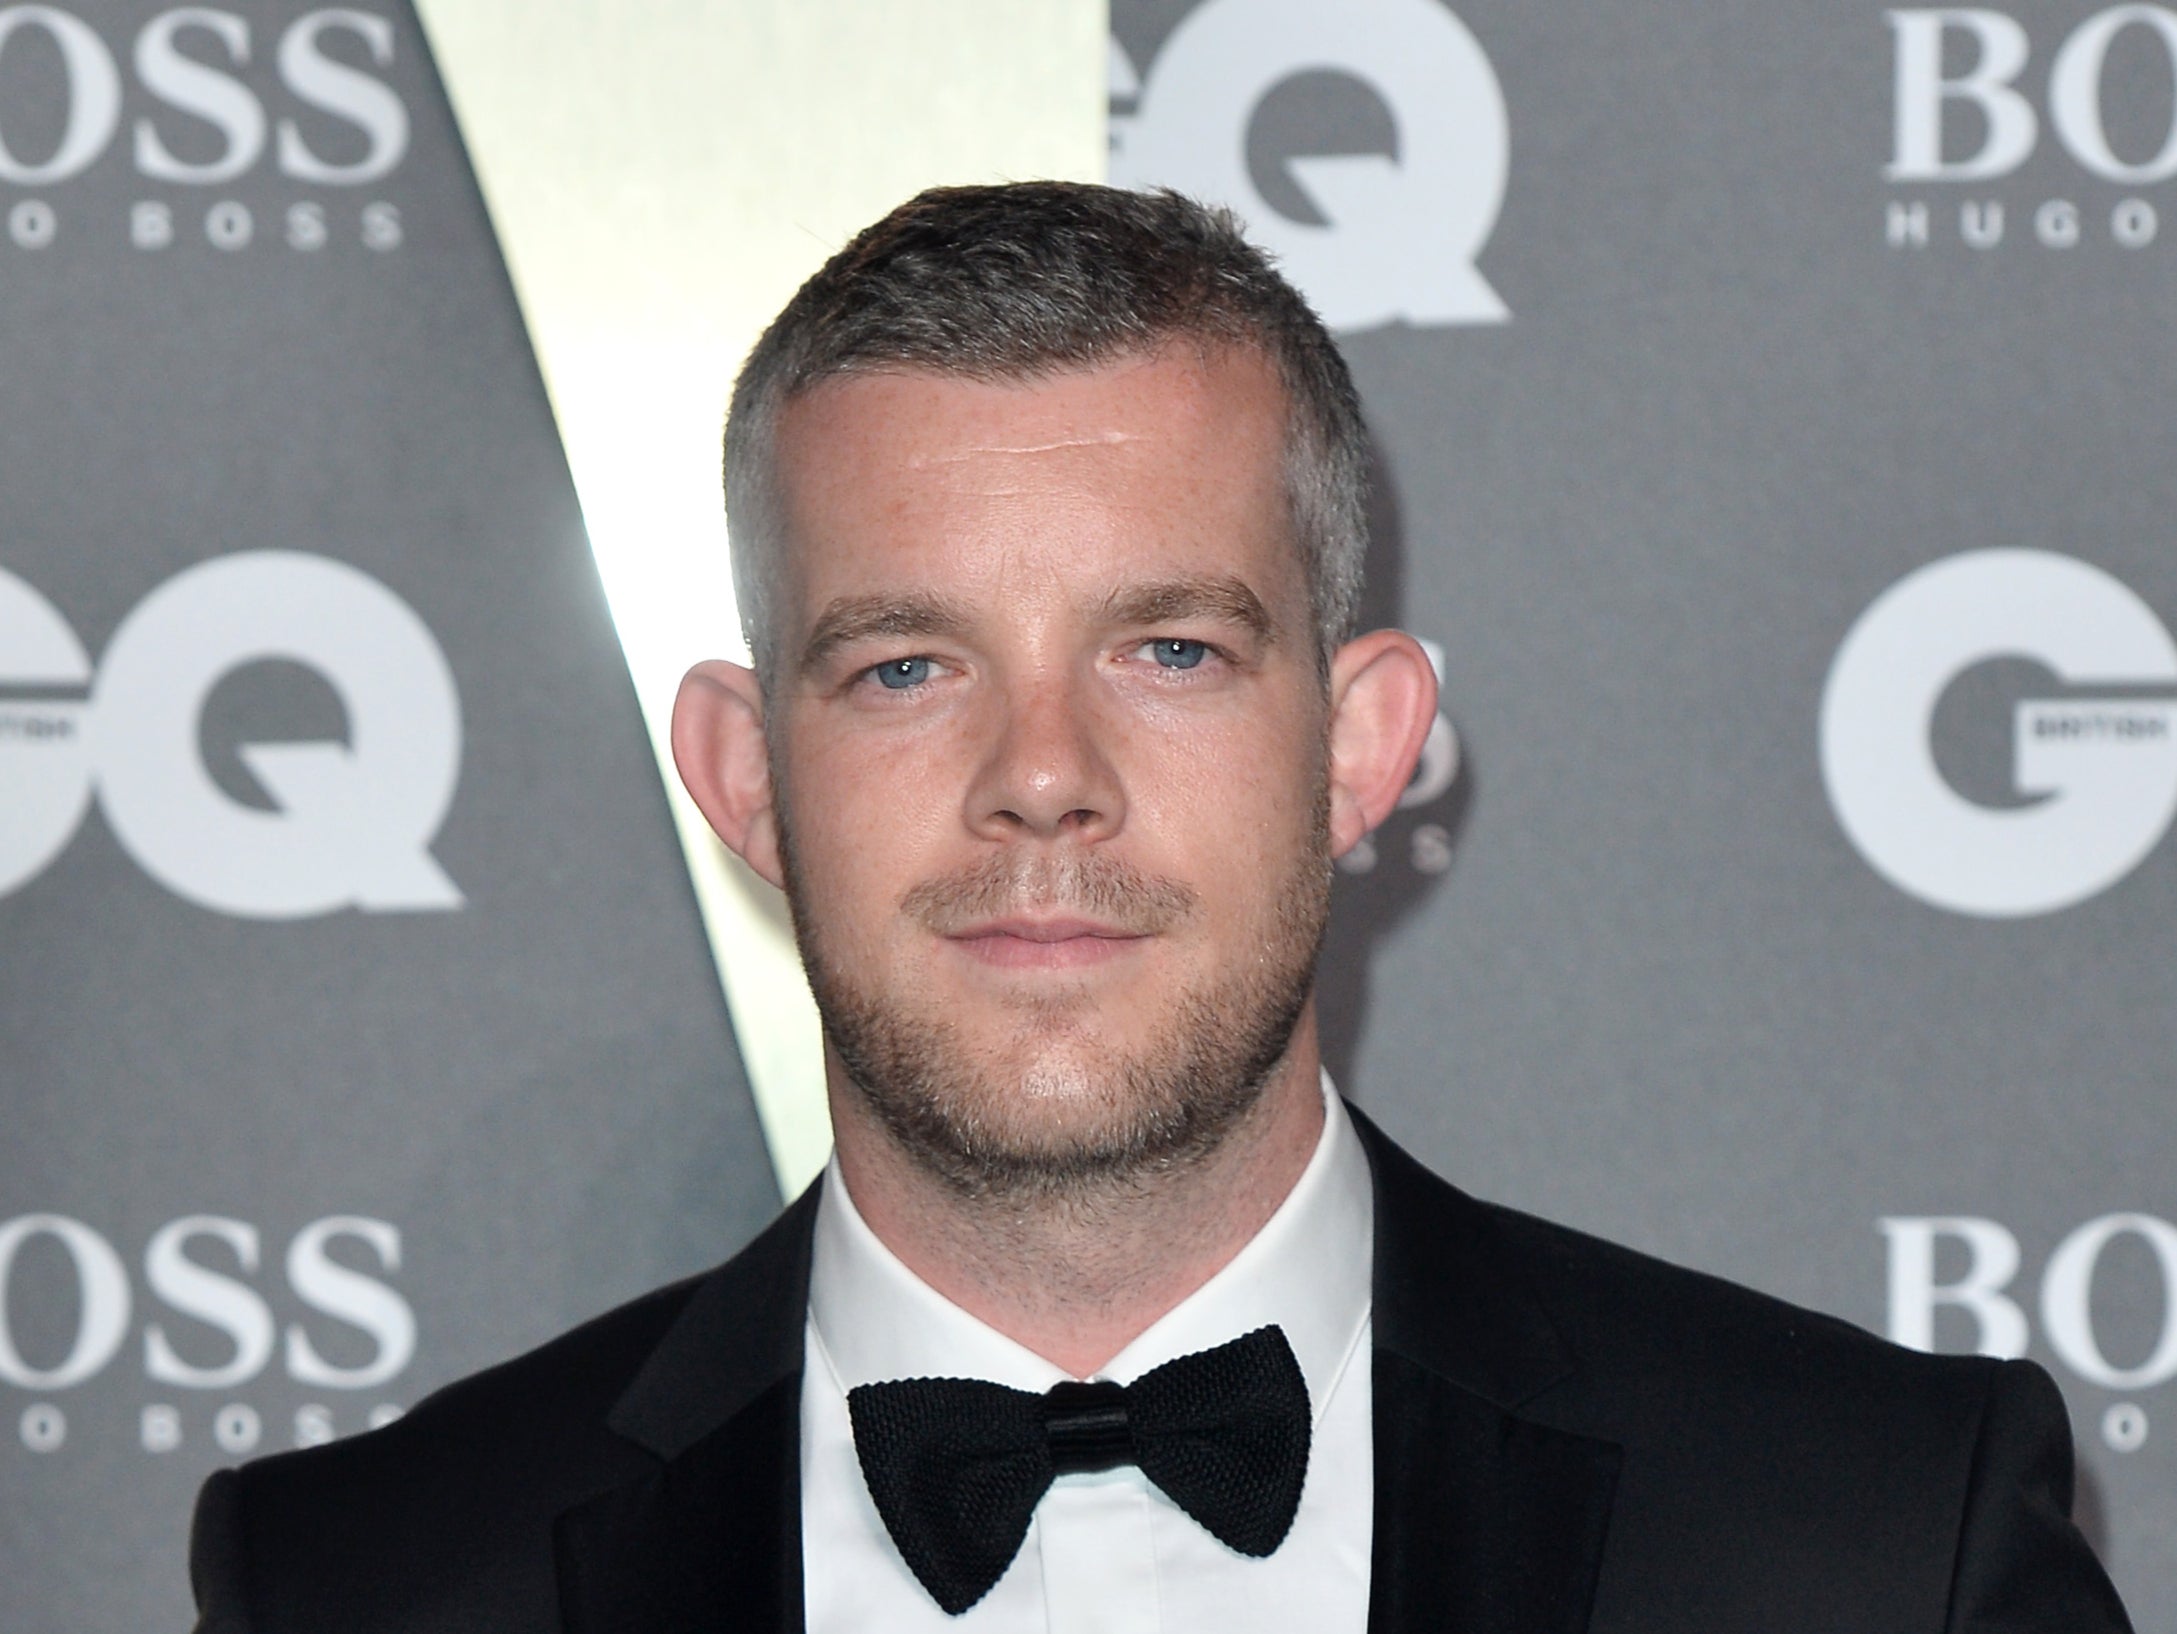 Russell Tovey has opened up about his experience of coming out to his parents